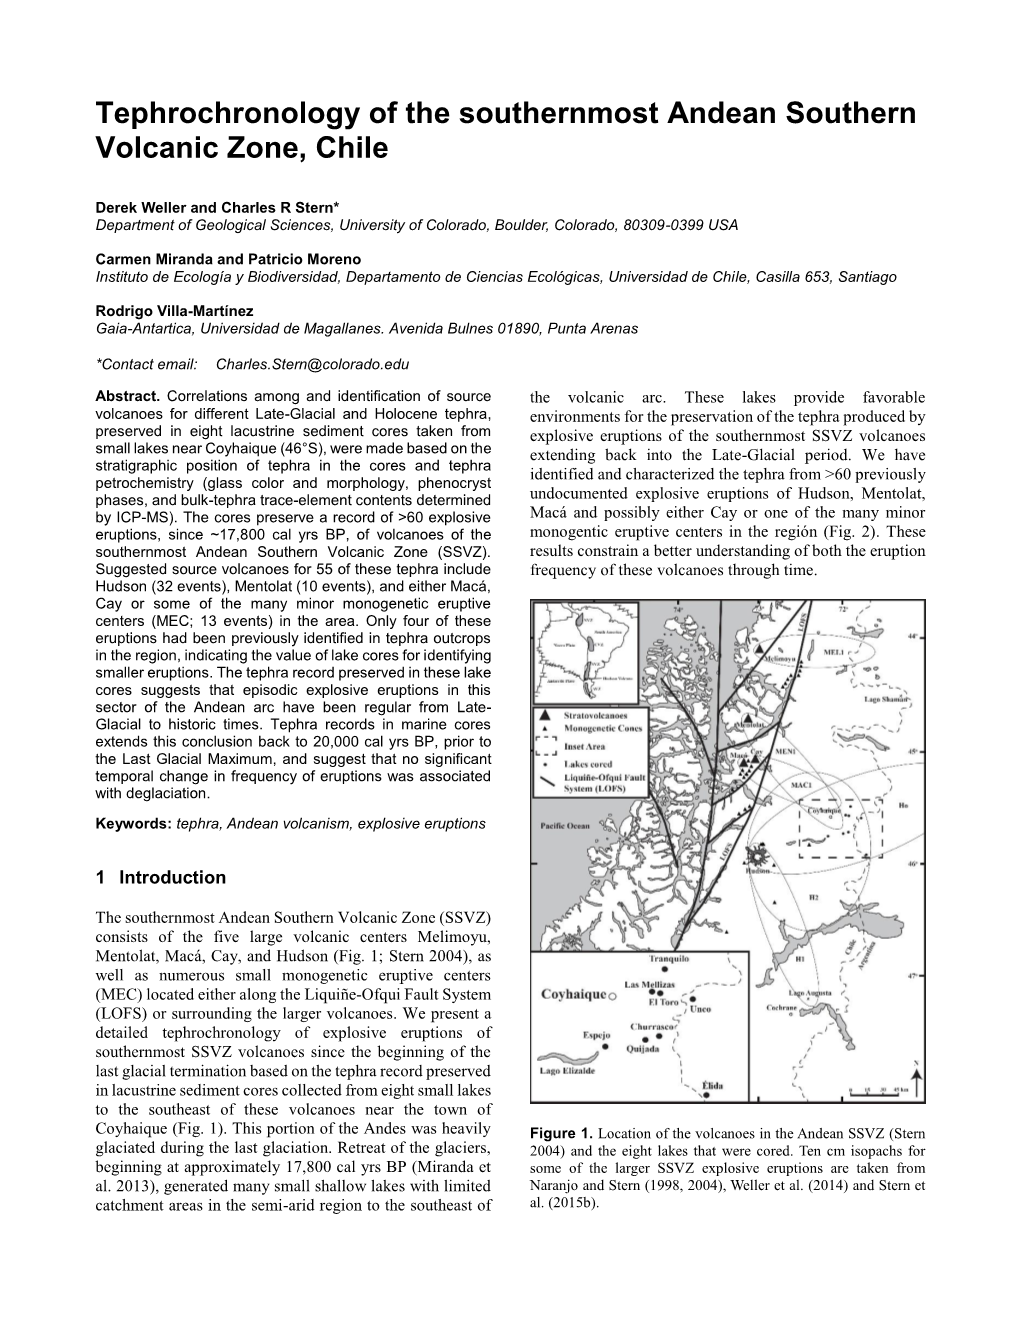 Tephrochronology of the Southernmost Andean Southern Volcanic Zone, Chile